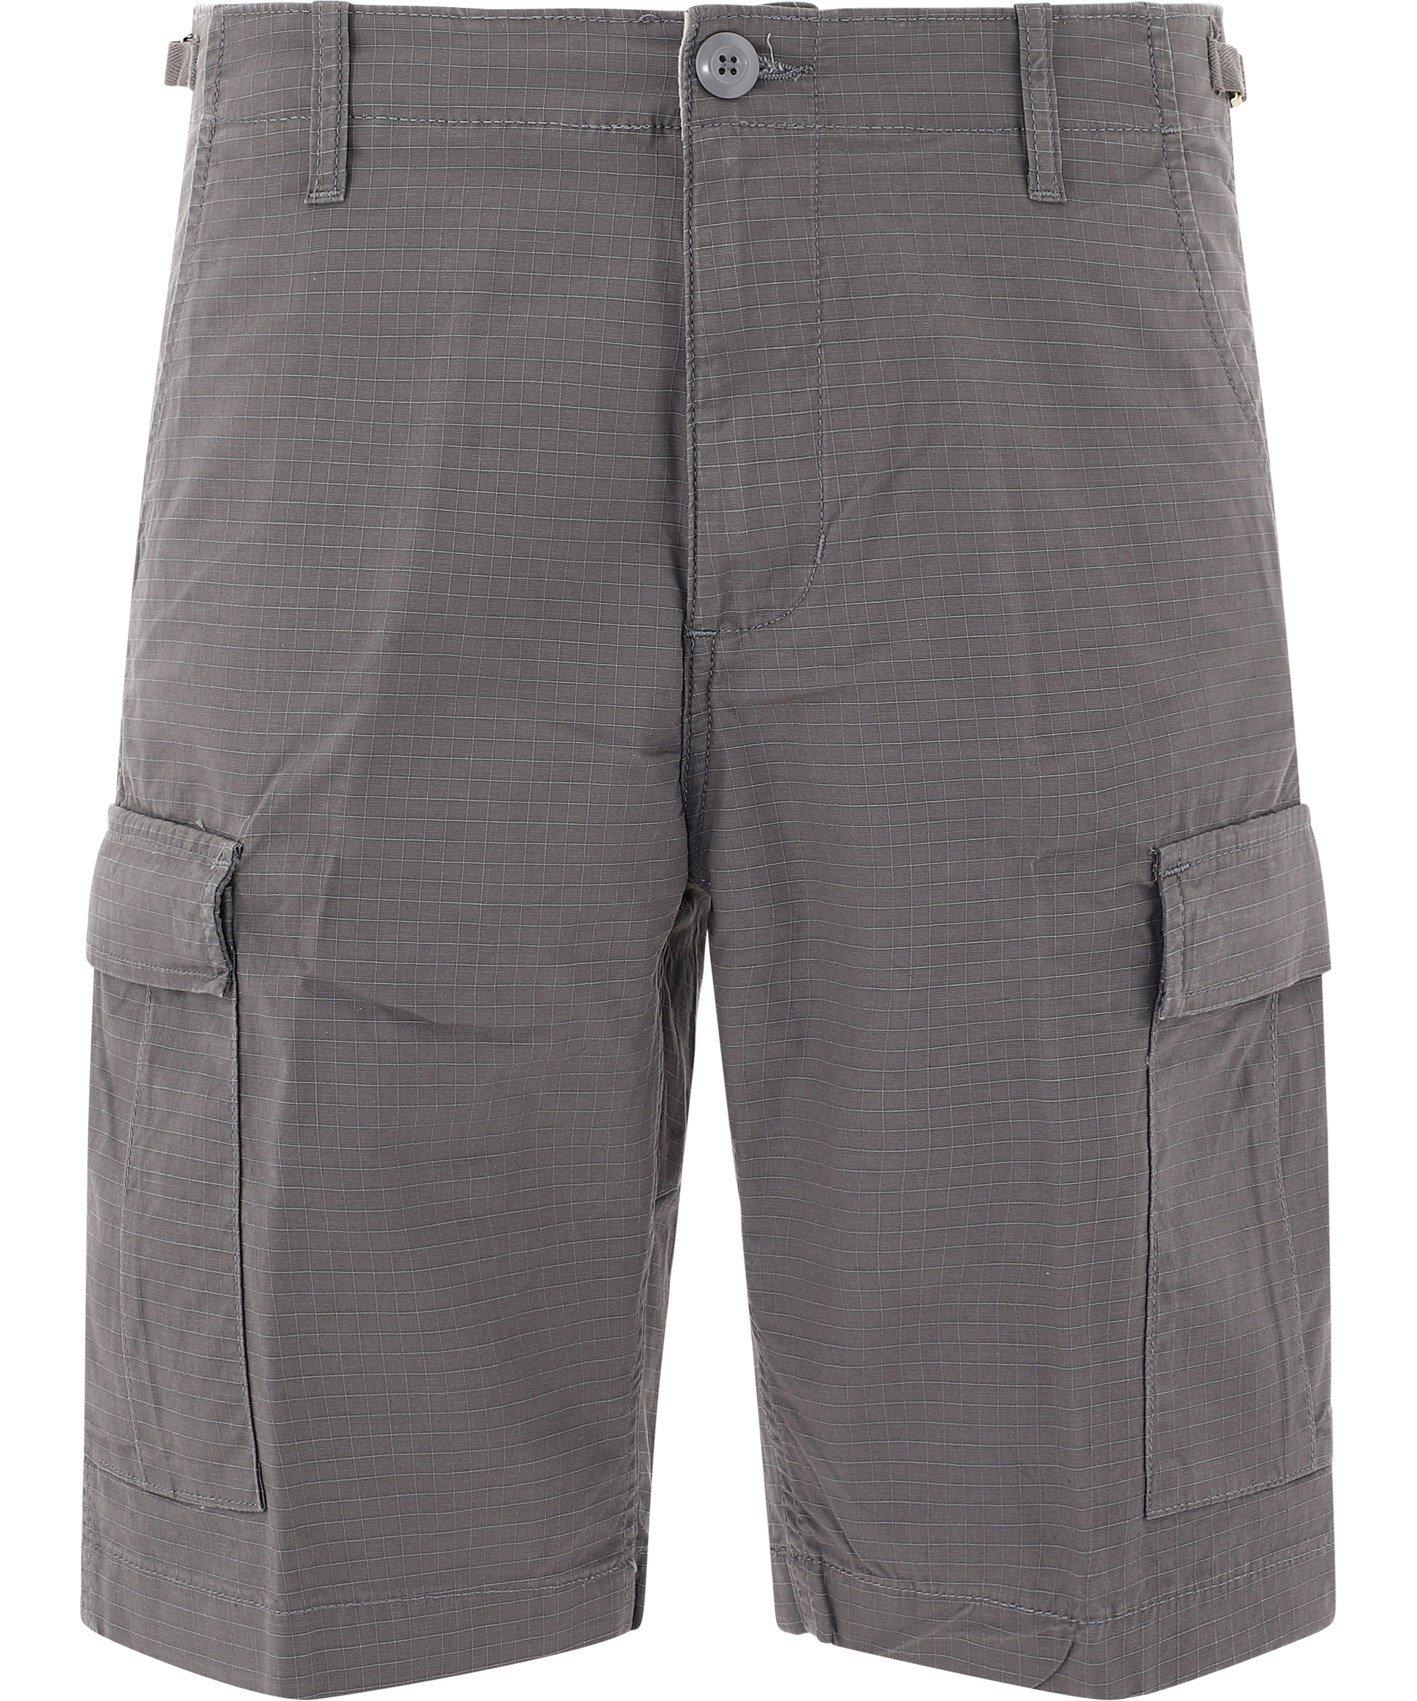 Carhartt WIP Cotton Aviation Shorts in Gray for Men - Lyst